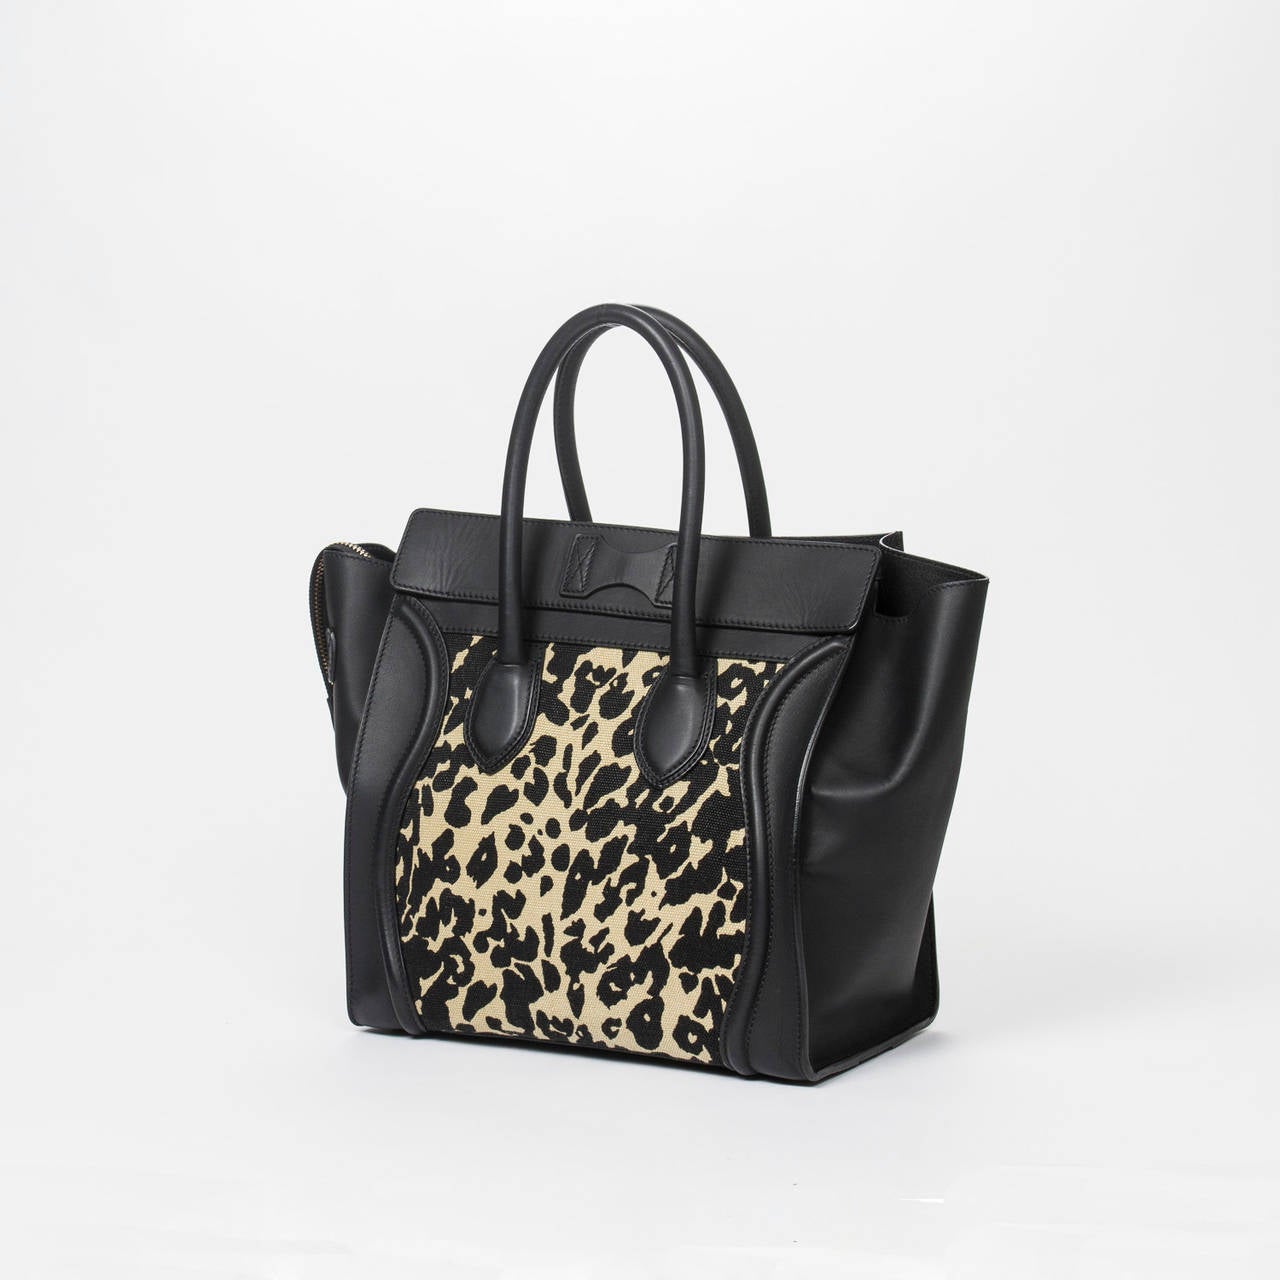 Luggage GM in leopard print canvas with black leather handles, gold tone hardware.